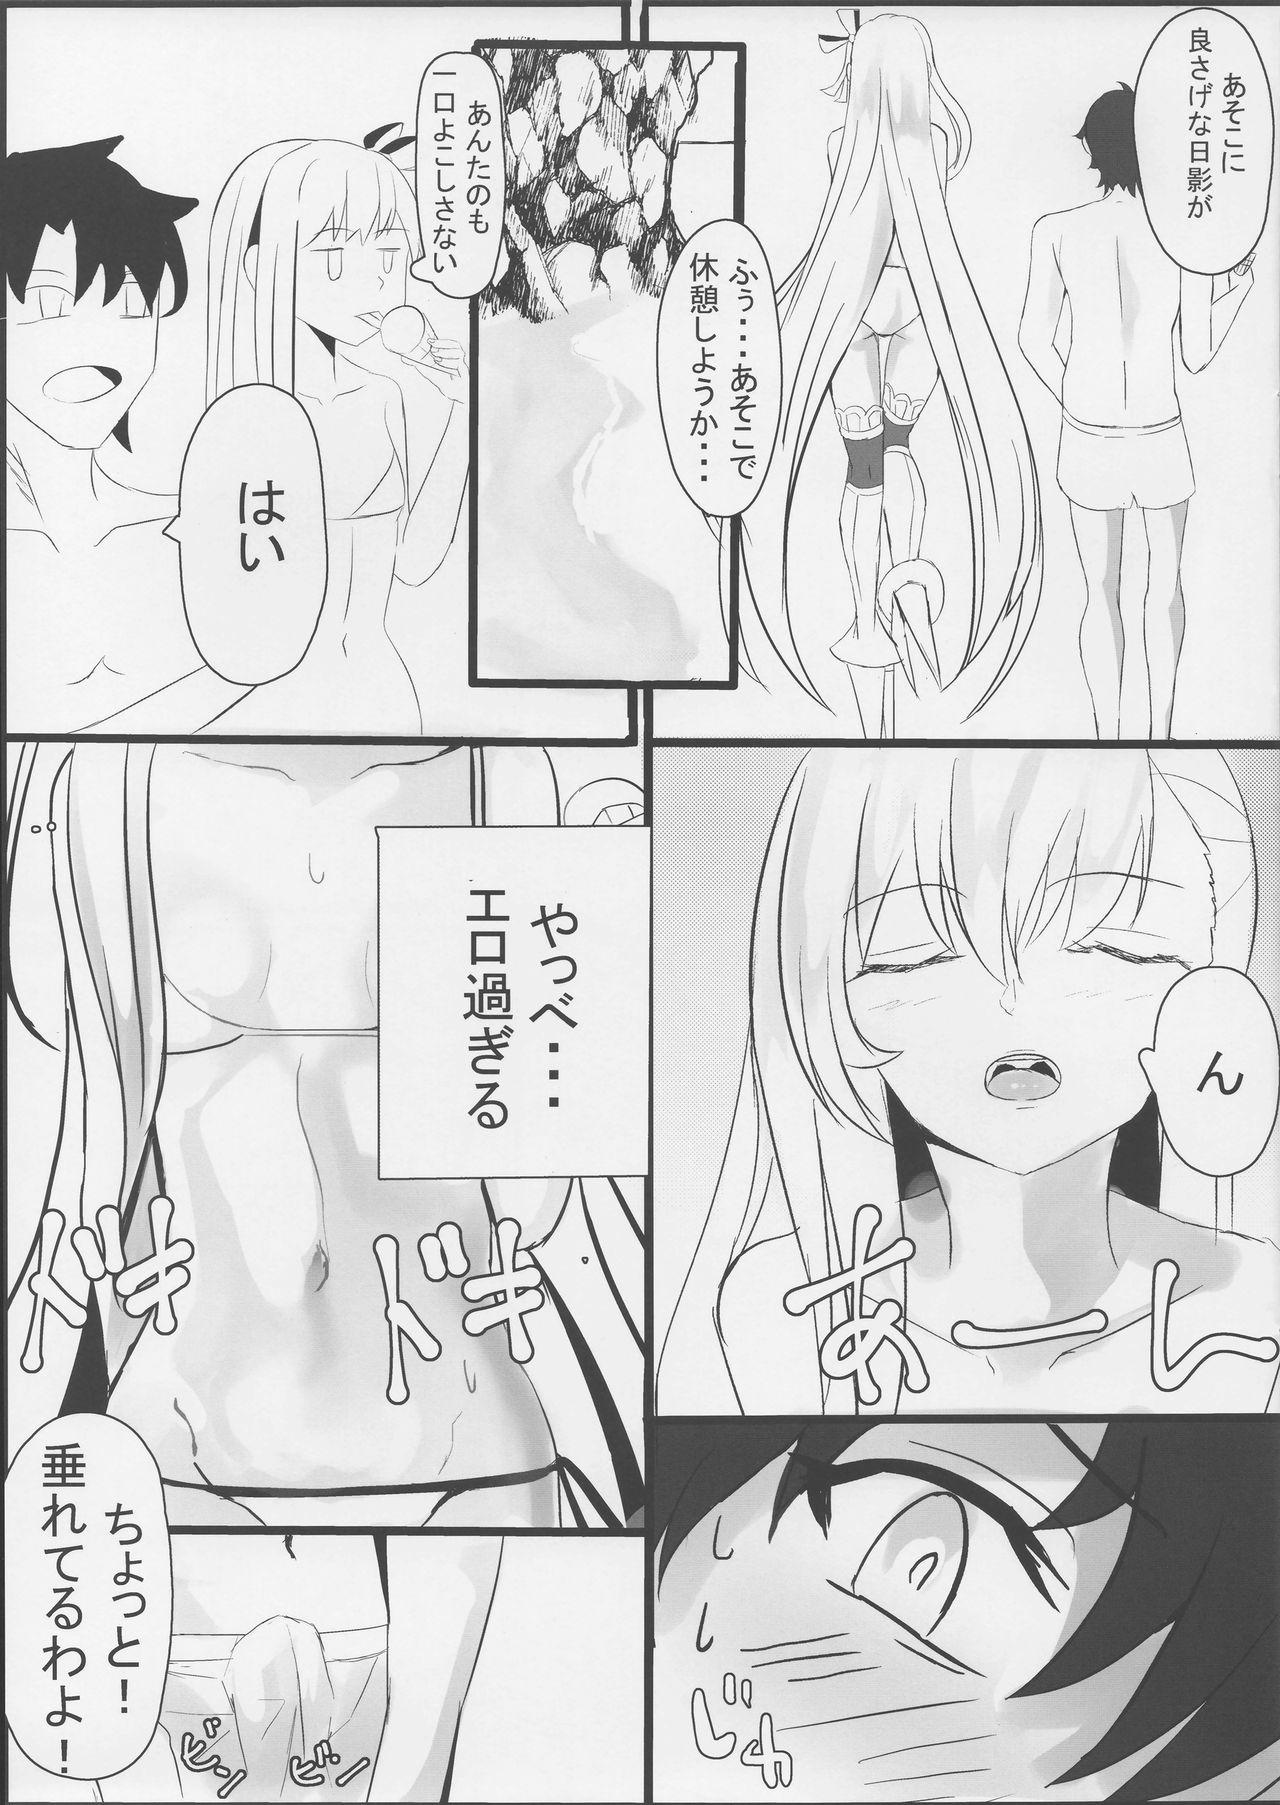 18 Year Old Melt down 2 - Fate grand order Thylinh - Page 6